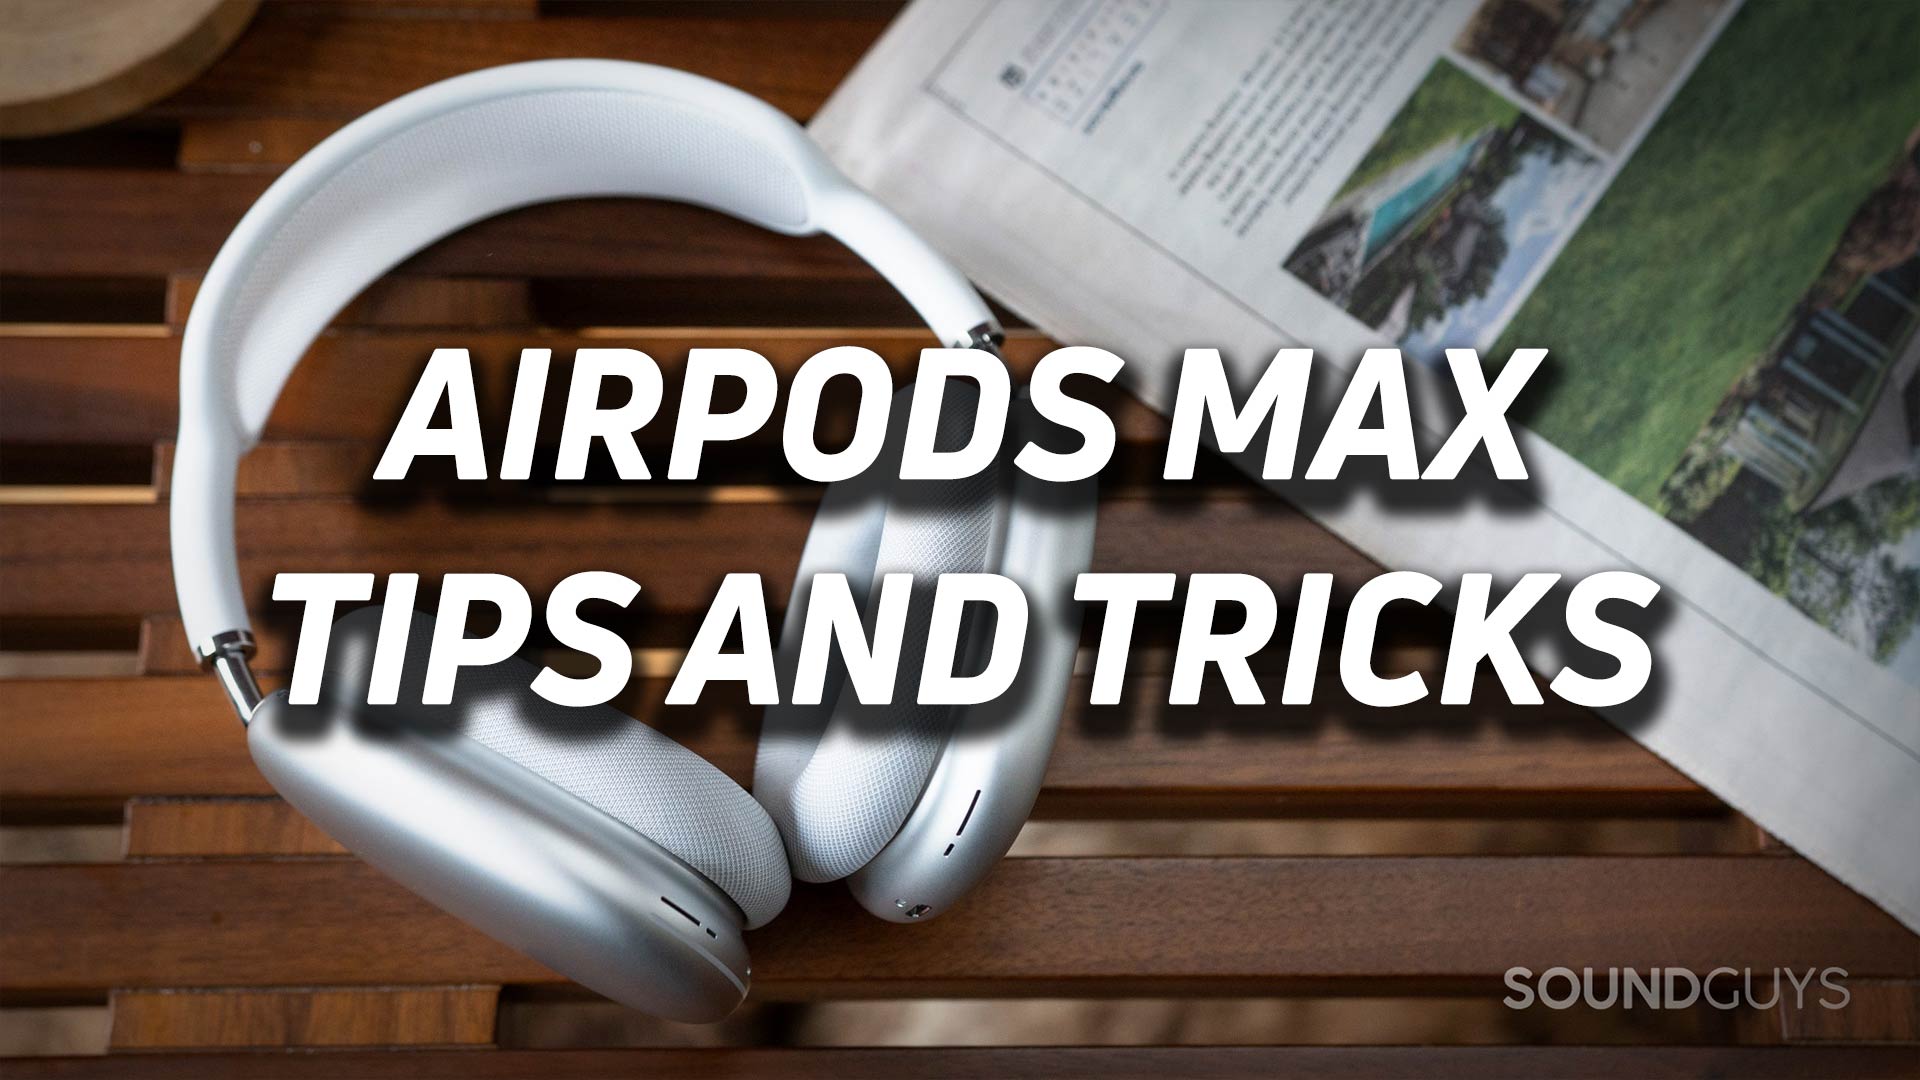 Set up AirPods Max with your Mac and other Bluetooth devices - Apple Support